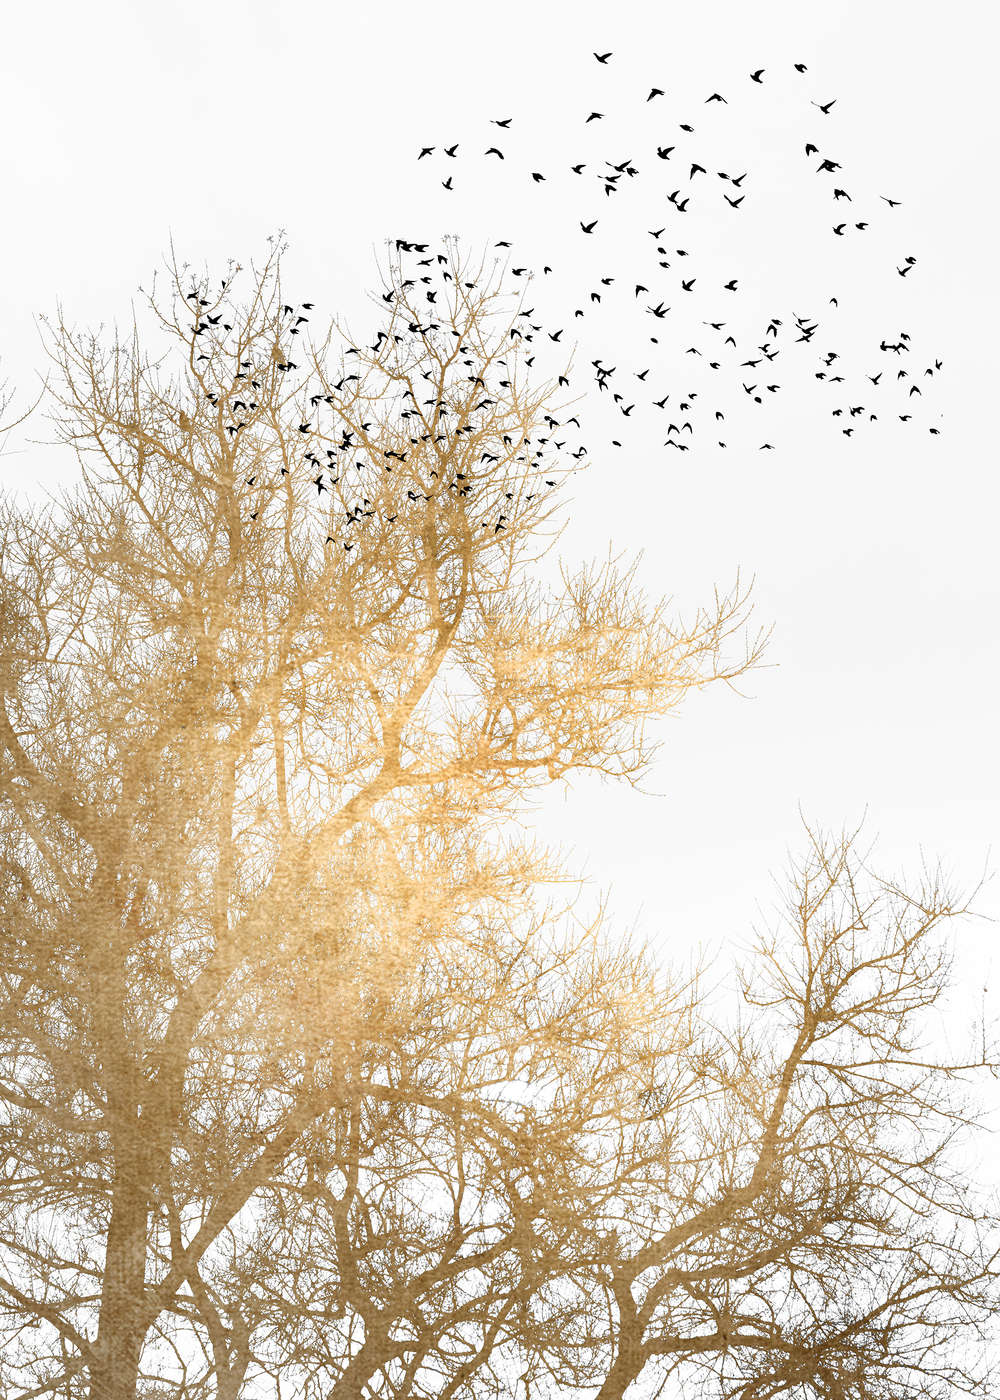             Photo wallpaper with golden trees and flock of birds
        